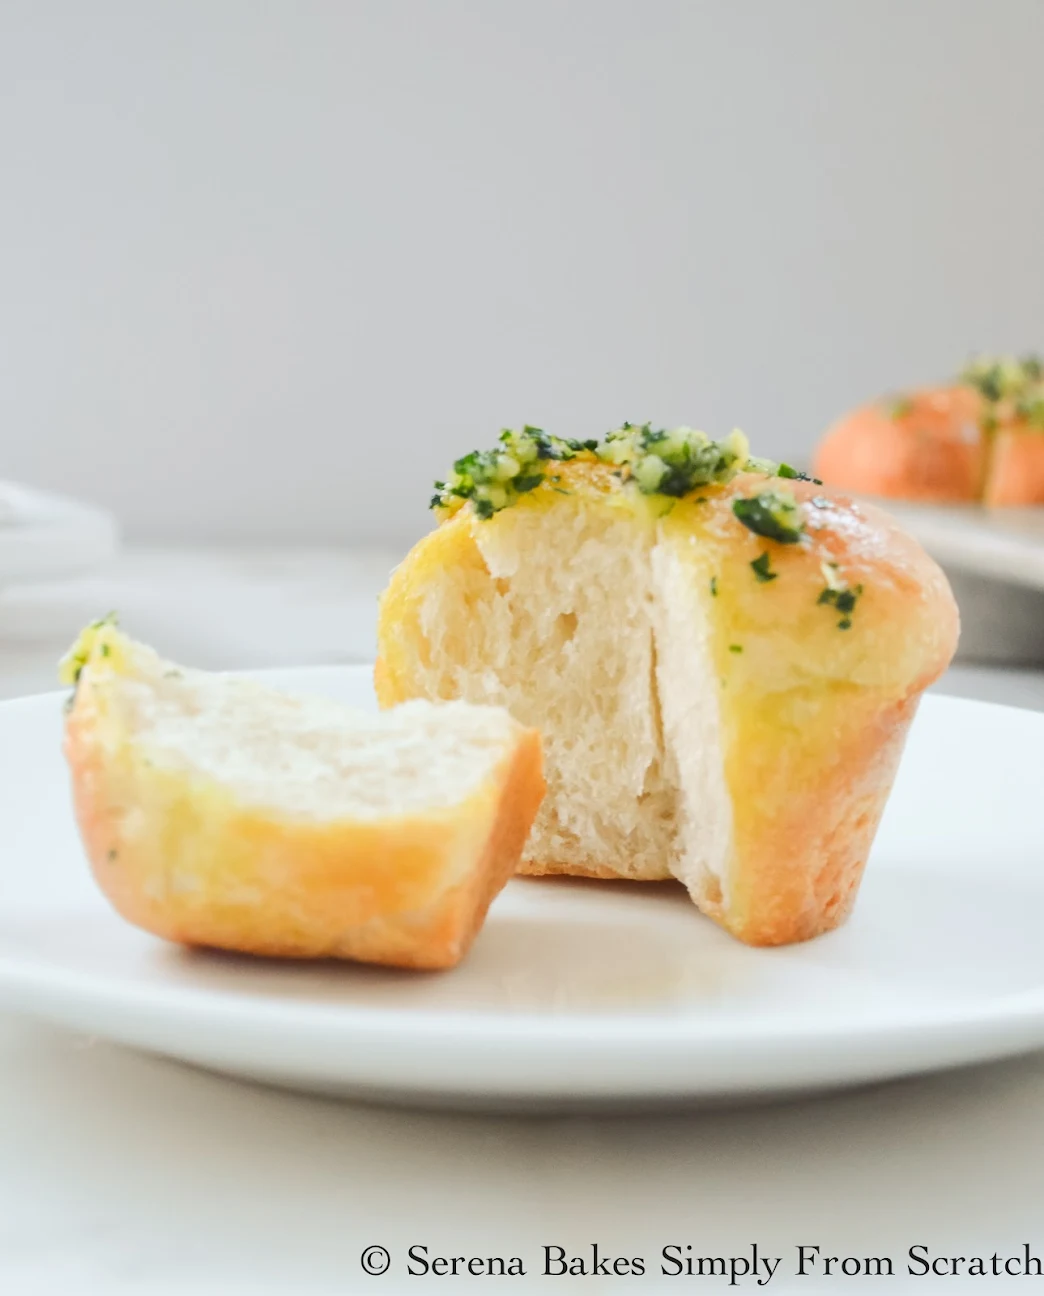 Garlic French Bread Dinner Rolls are a holiday favorite.